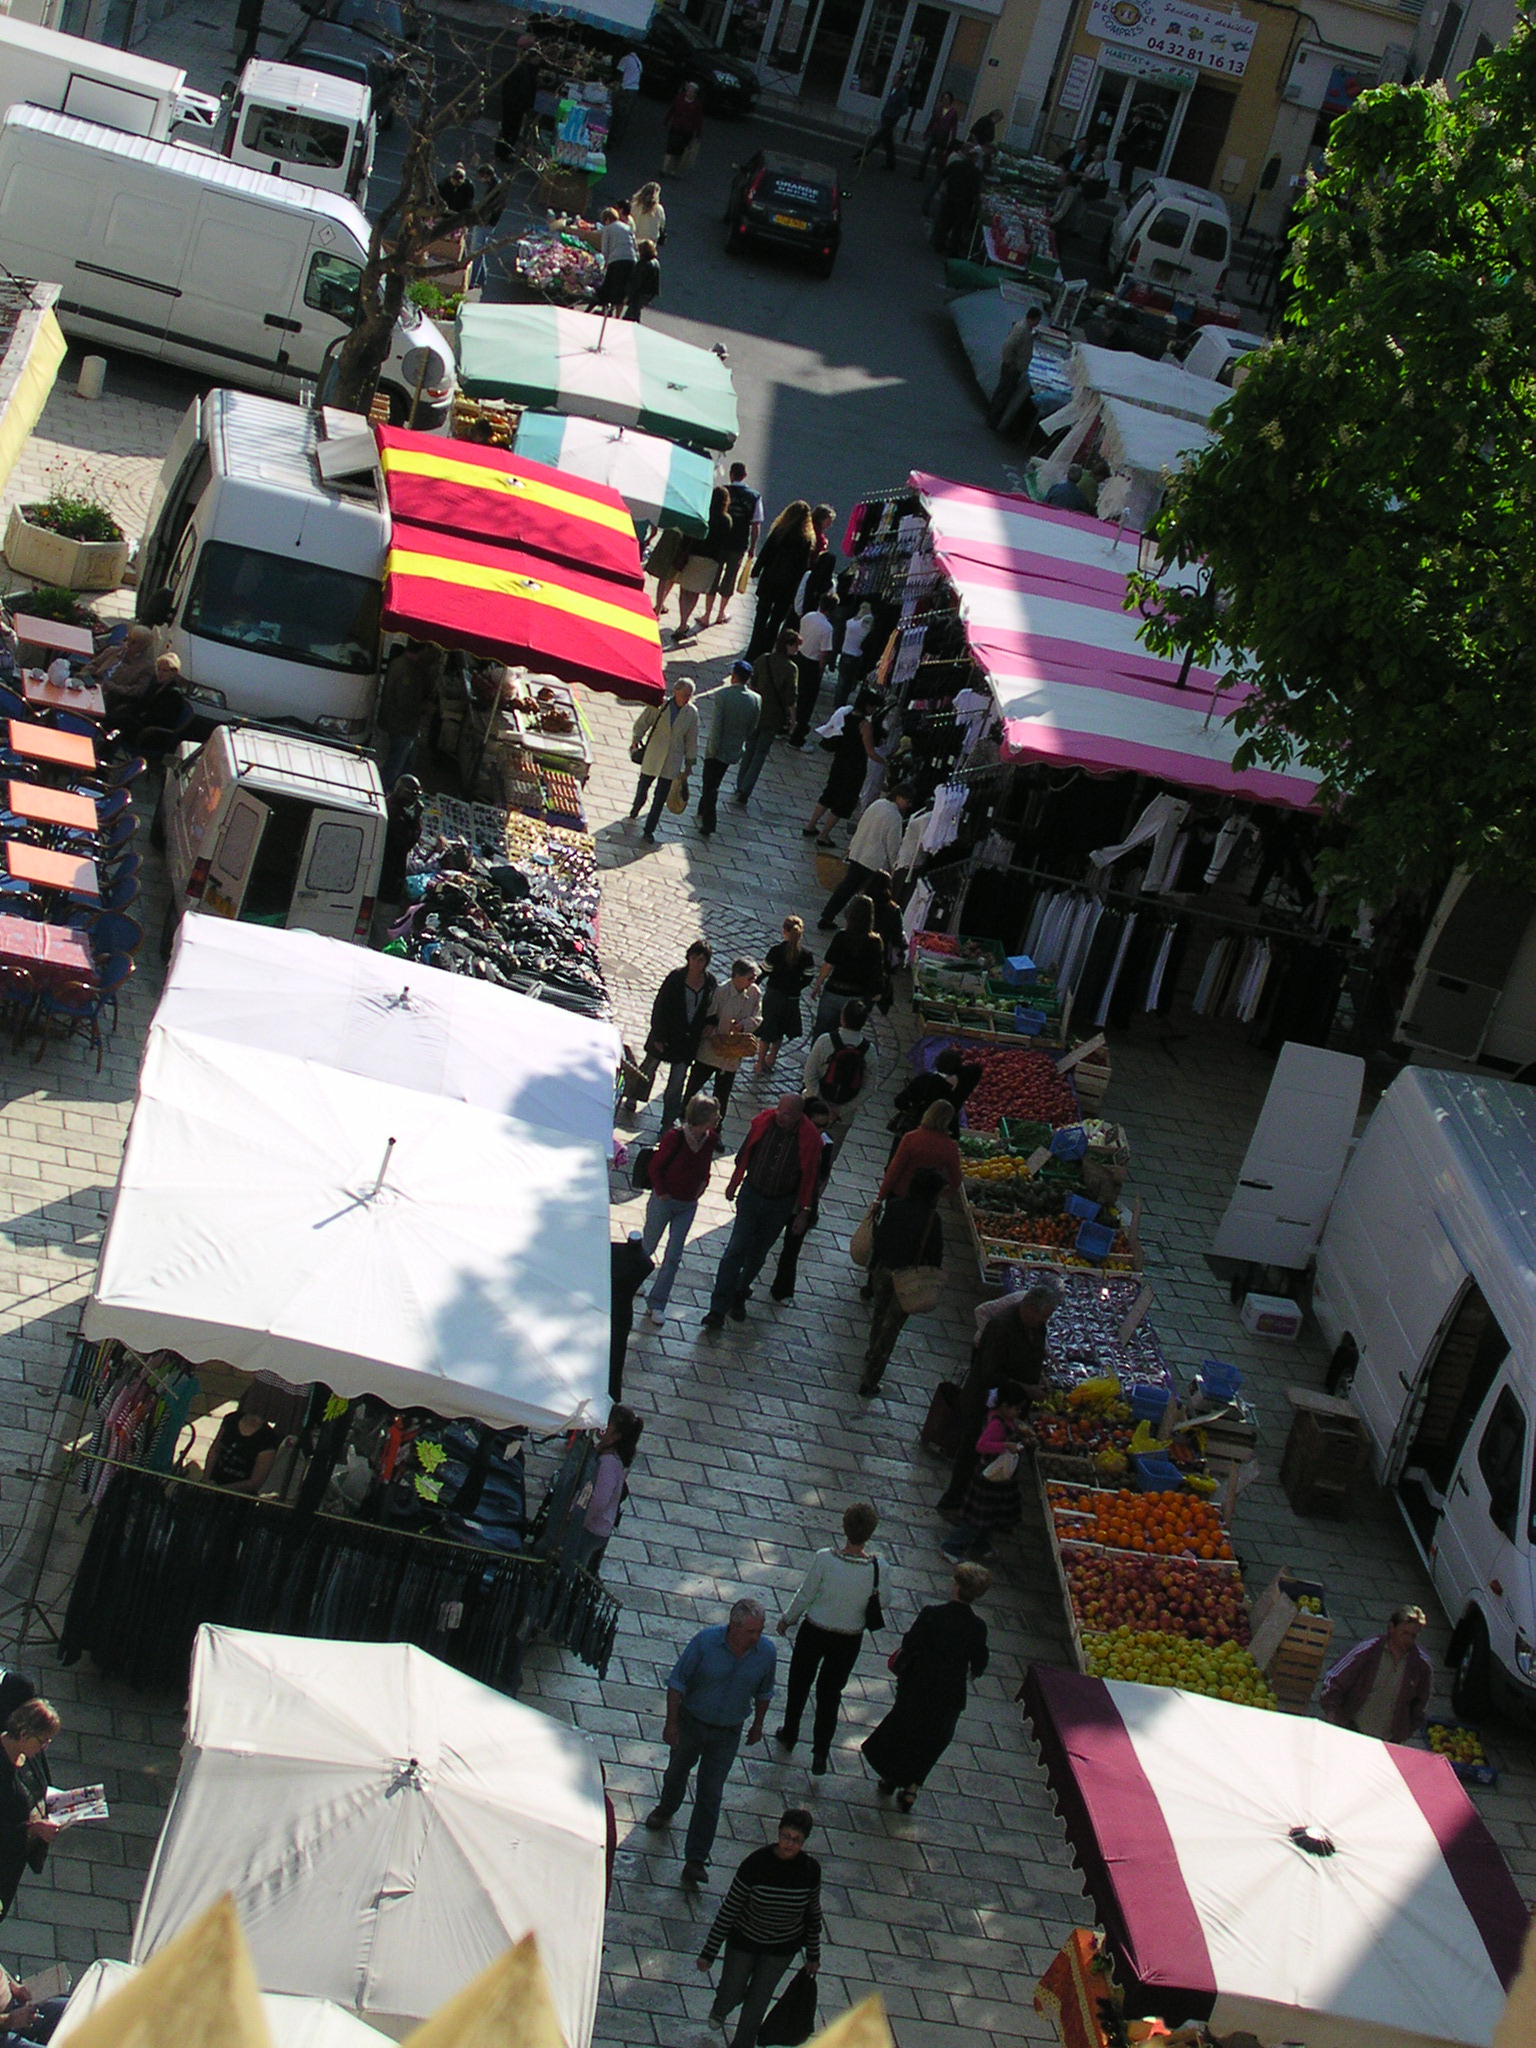 the large open air flea market in the town has many tents, vendors and vendors on it